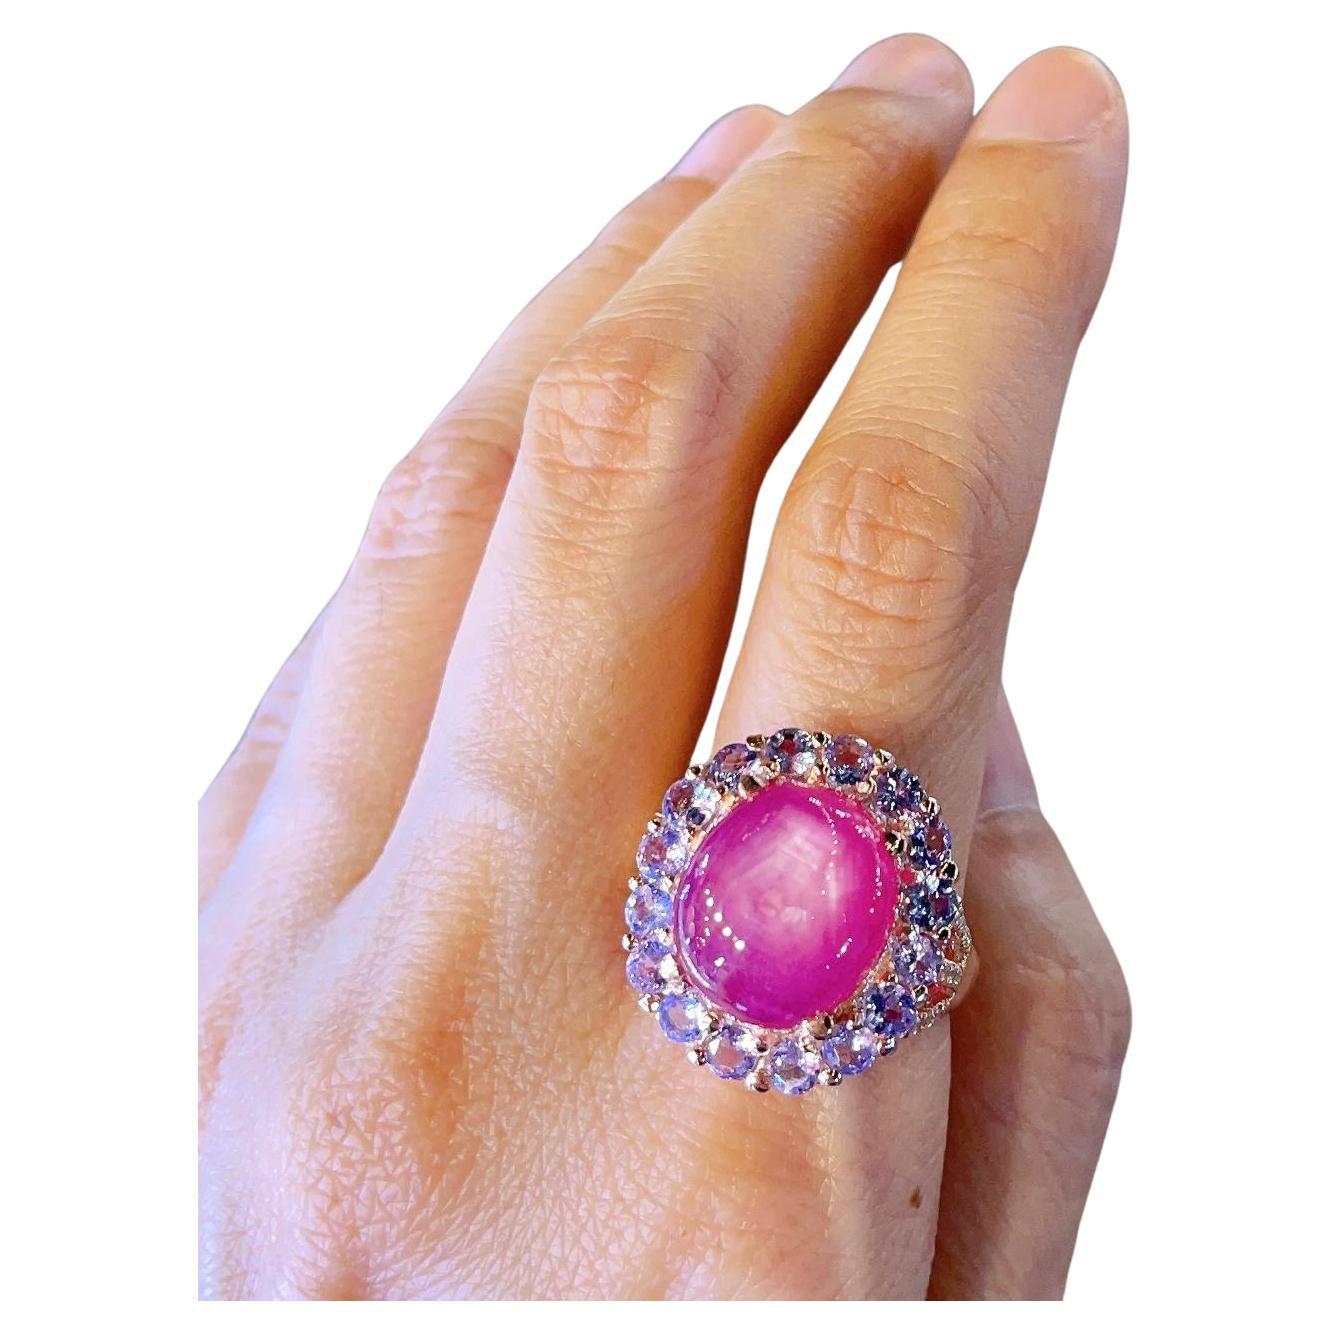 Bochic “Capri” Star Ruby Ring with Purple Tanzanite 
Set in 22 Gold & Silver 
Natural Star Ruby Cabochon - 24 carats 
Natural Purple Tanzanite set all around  - 11 carats 
Round brilliant shape
This Ring is perfect to wear day to night by
Day to